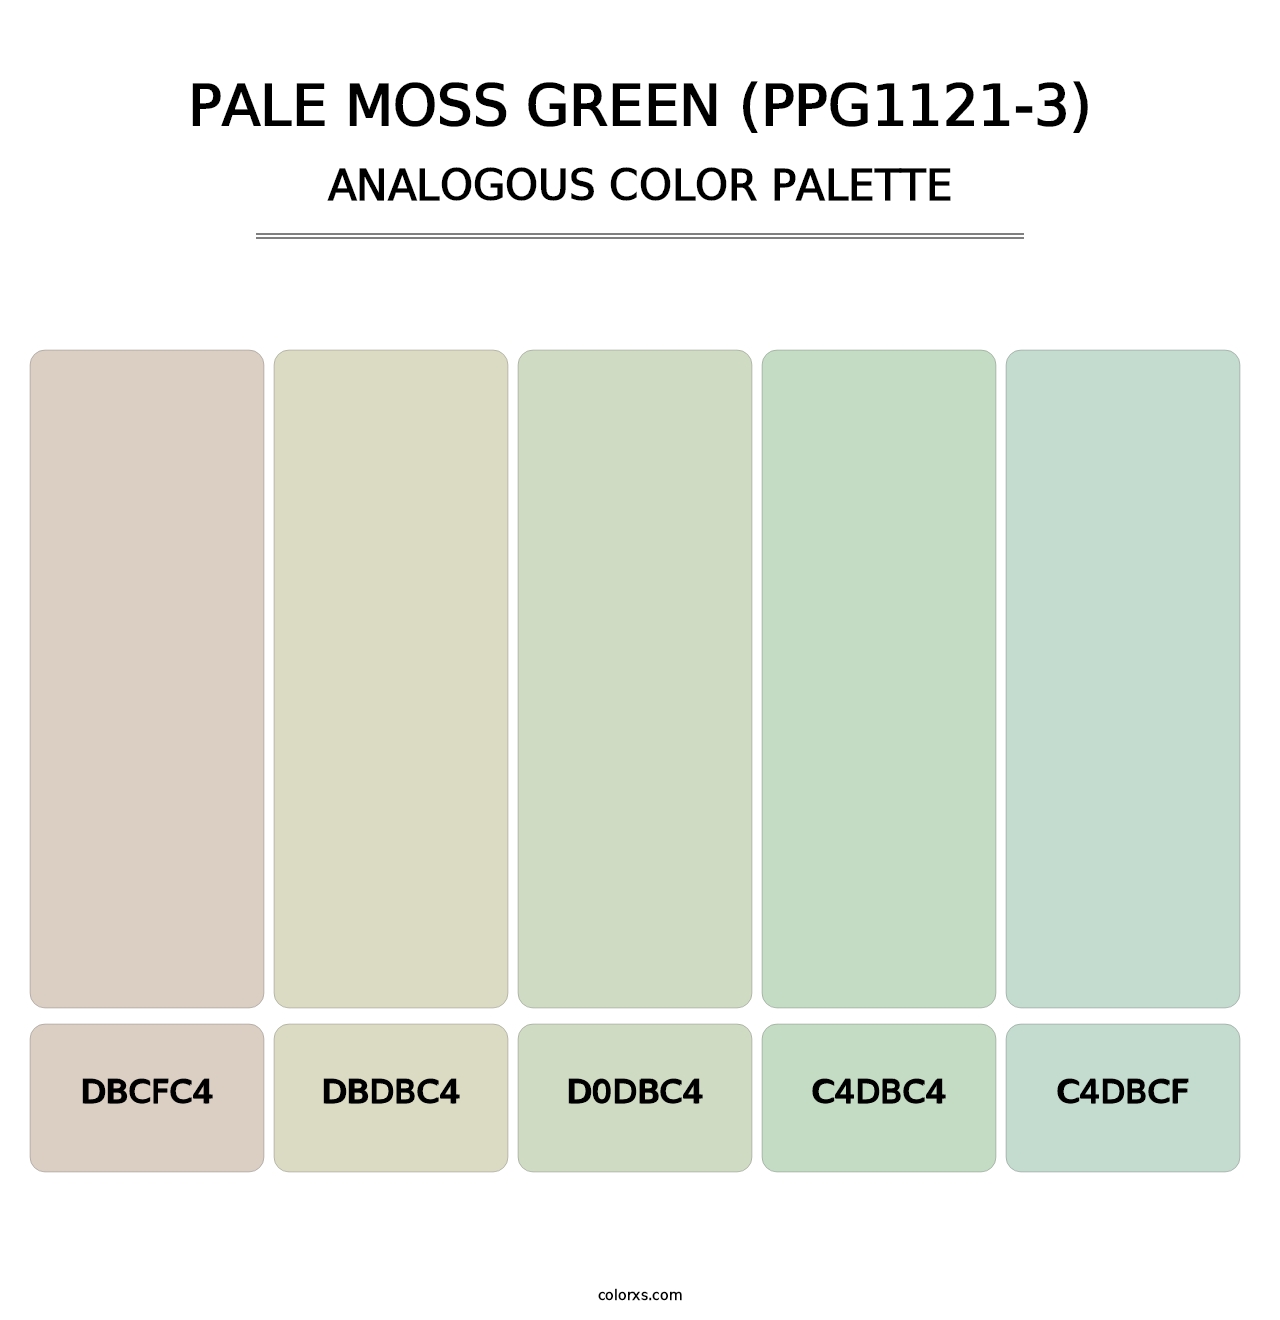 Pale Moss Green (PPG1121-3) - Analogous Color Palette